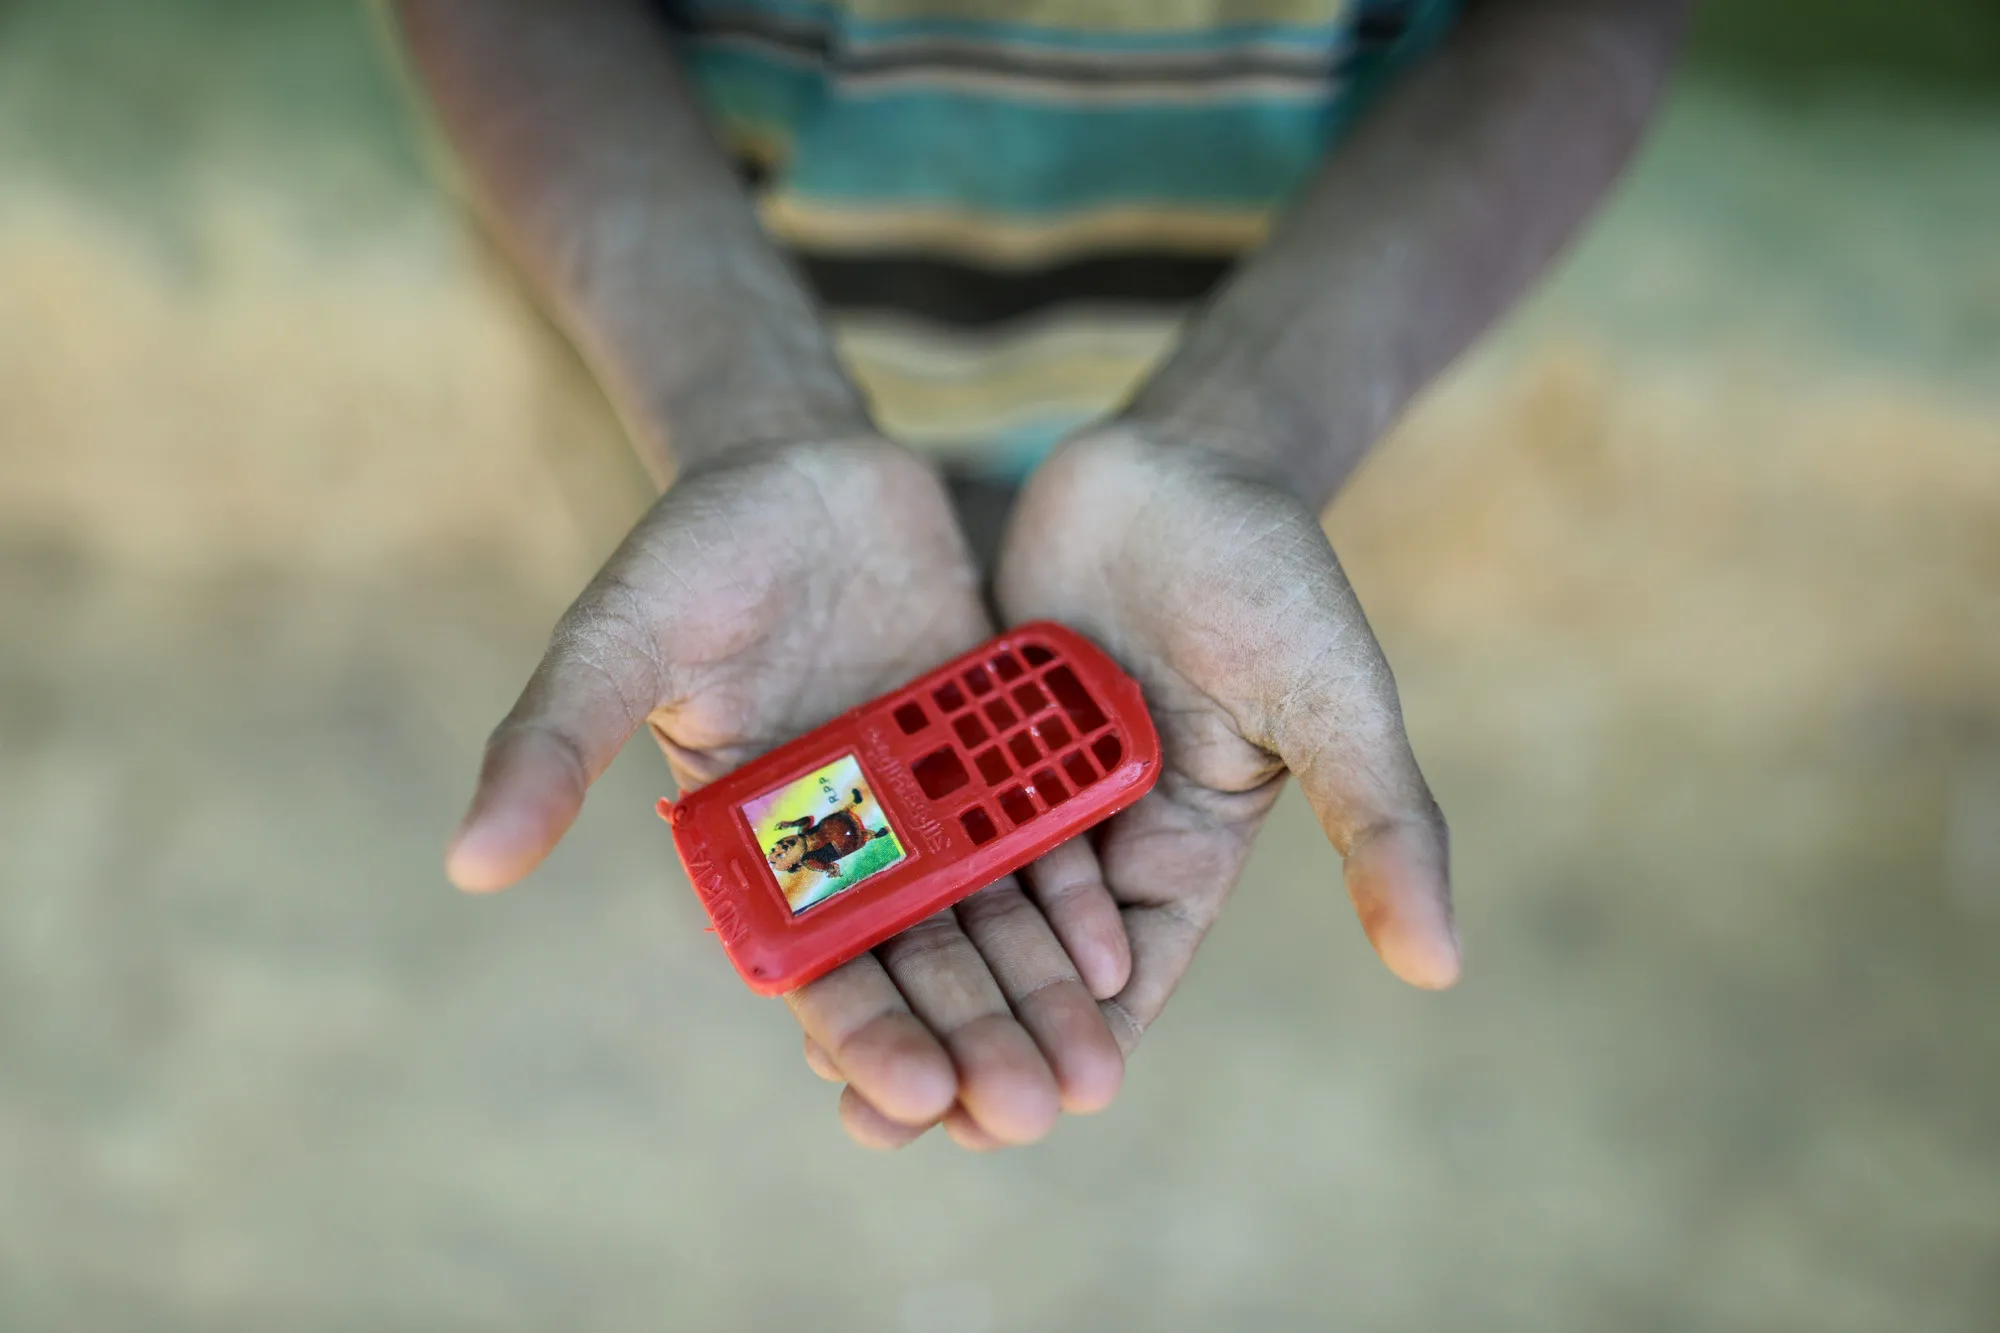 Mohammad found this plastic phone in a snack box he received. The 10-year-old fled Myanmar after his home was burned down. One day he wants to have a real phone to call his friends.